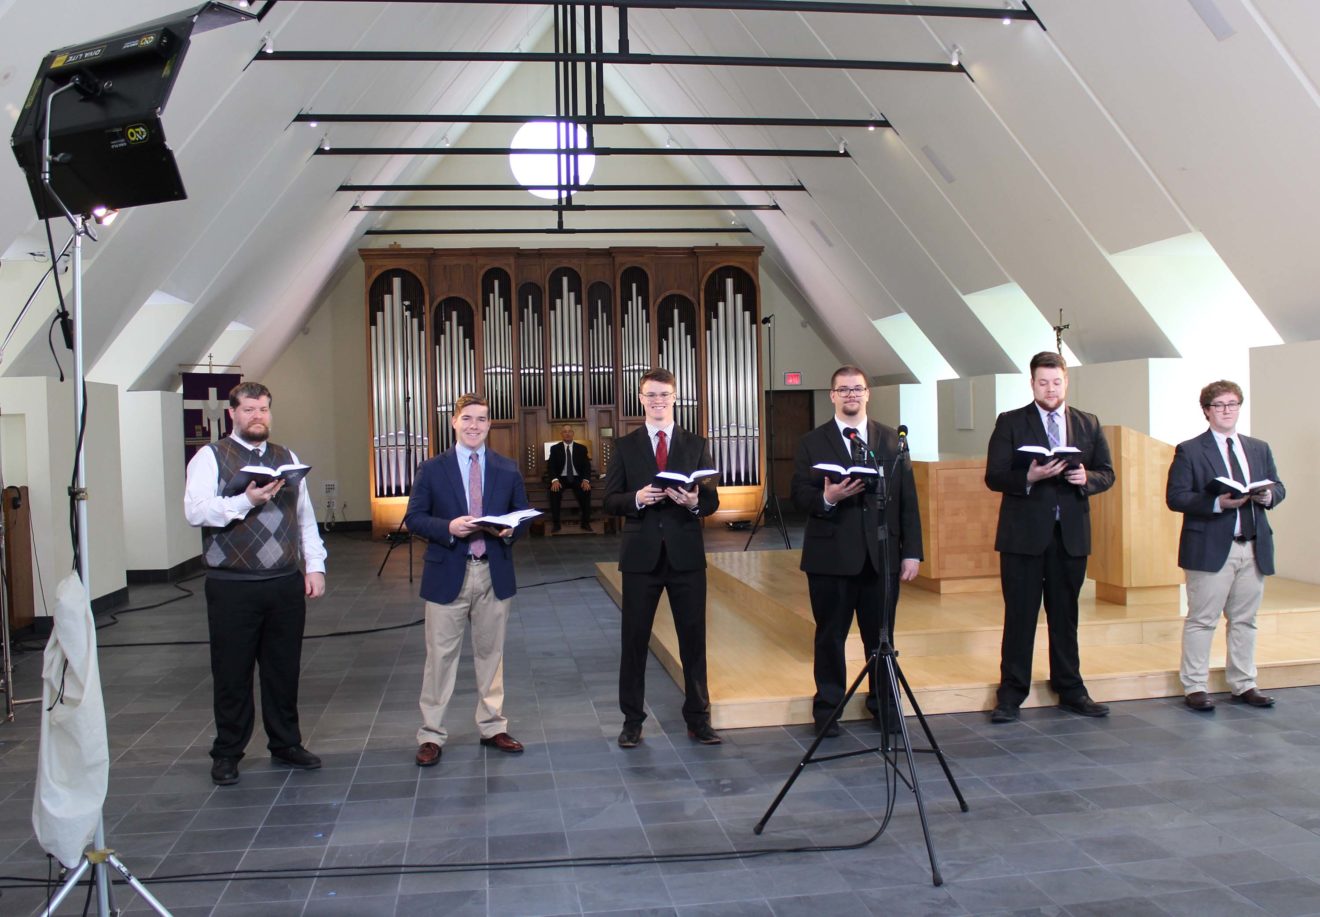 Choir of six Wisconsin Lutheran Seminary students singing and Prof. Aaron Christie playing organ